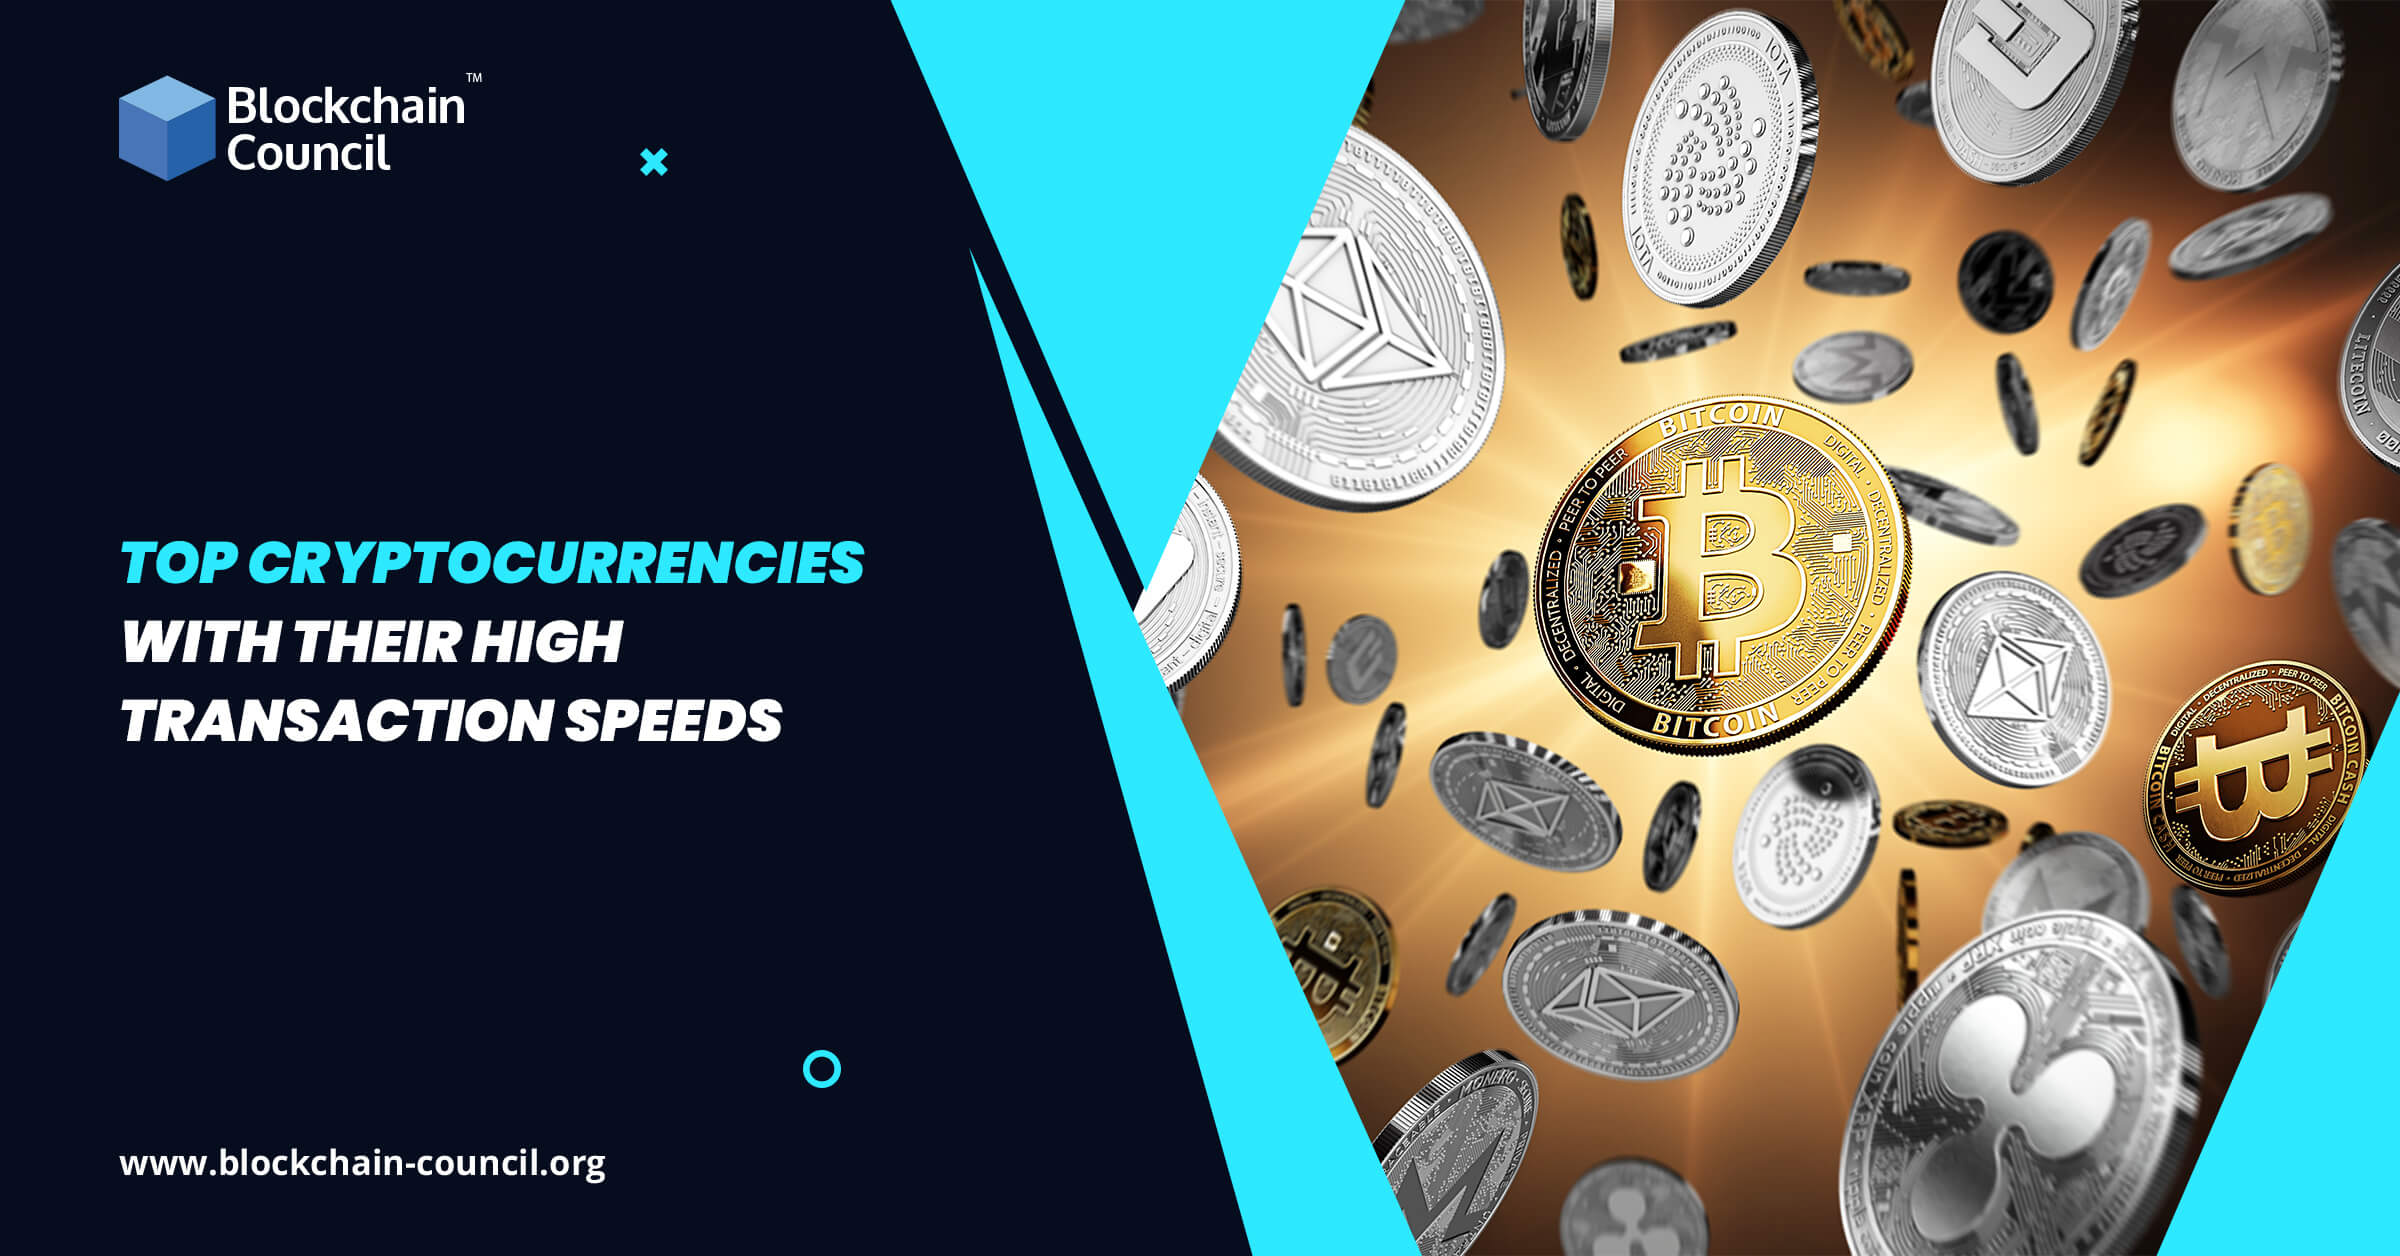 Top Cryptocurrencies With Their High Transaction Speeds